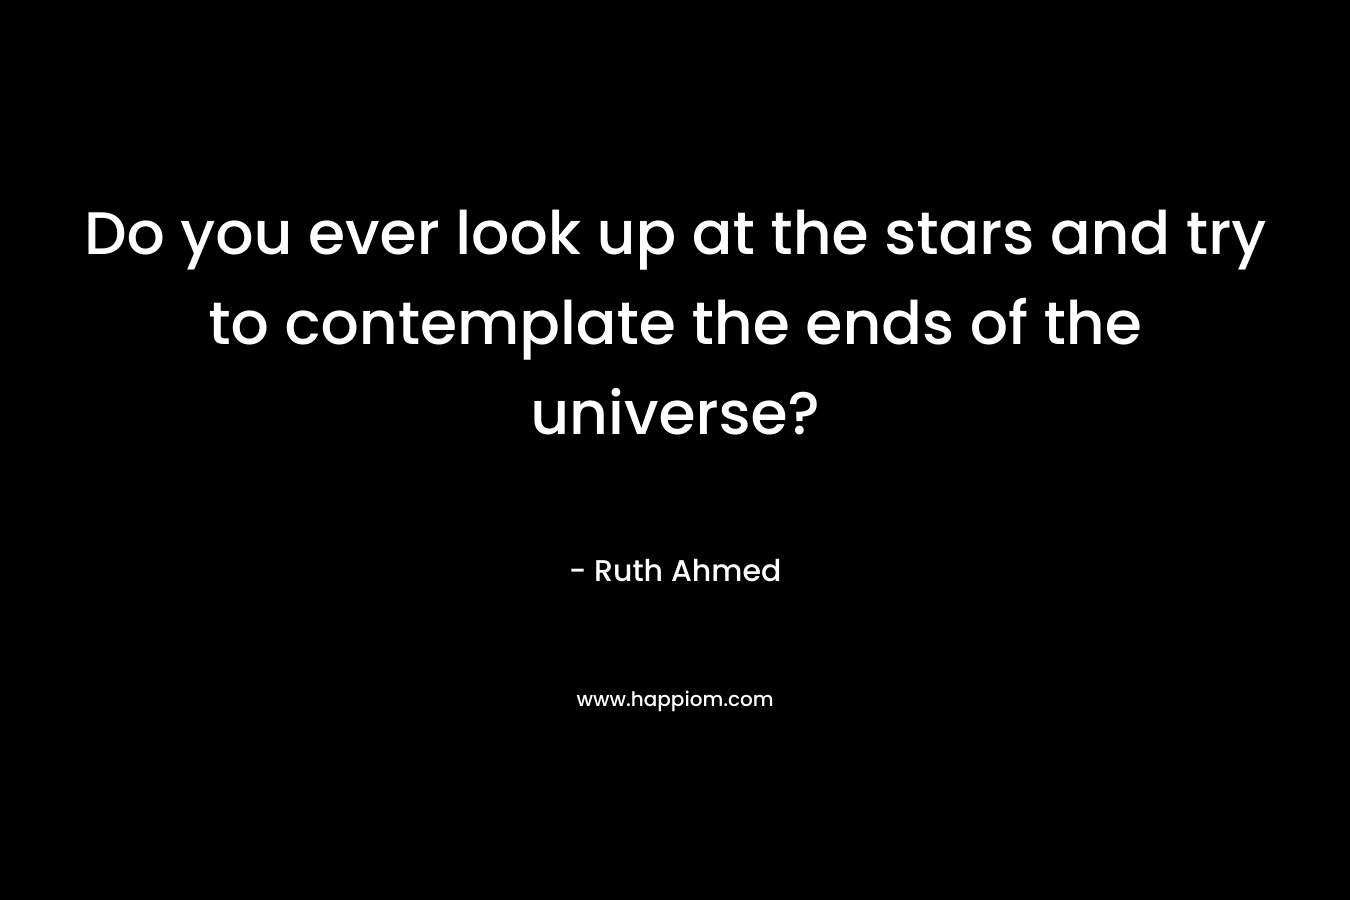 Do you ever look up at the stars and try to contemplate the ends of the universe?